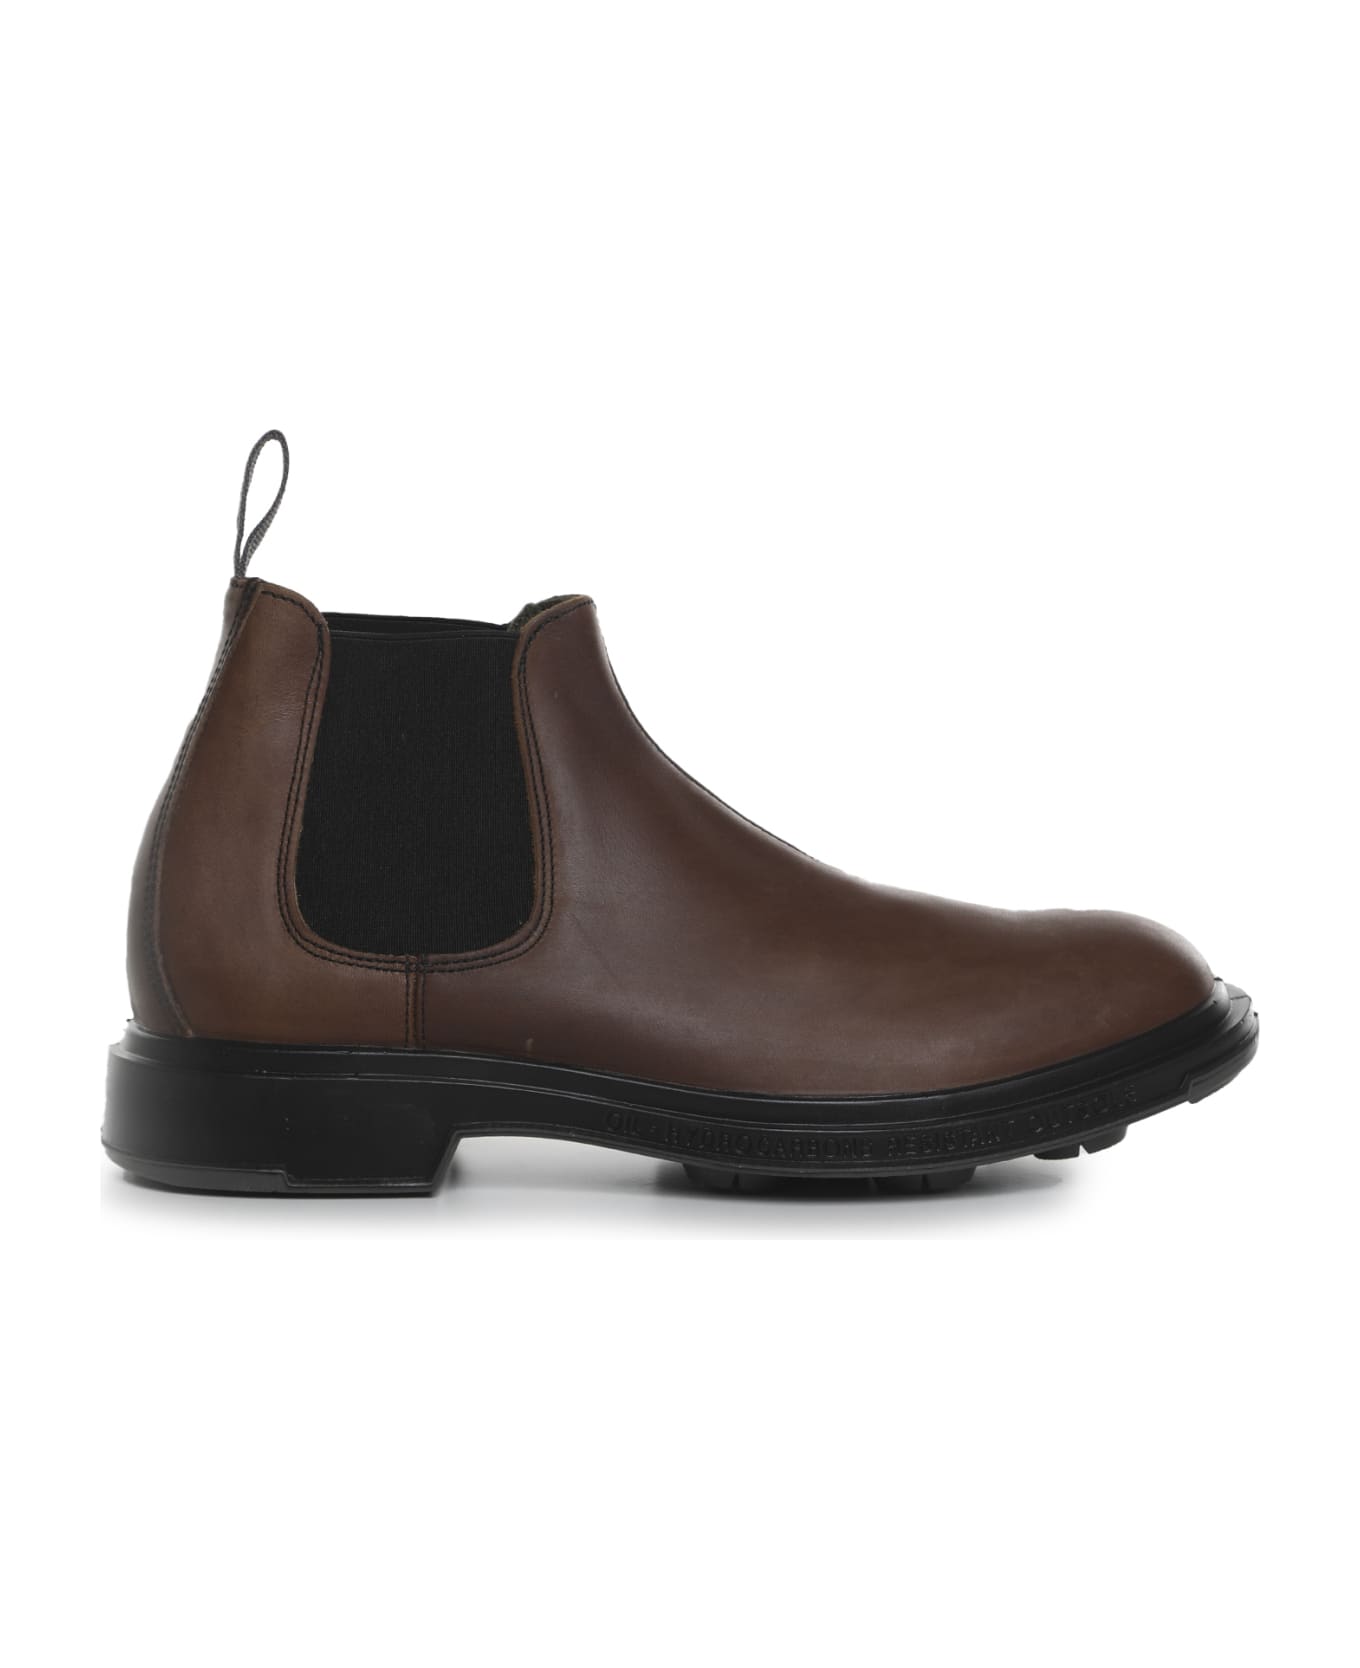 Pezzol 1951 Royal Ankle Boots - Brown